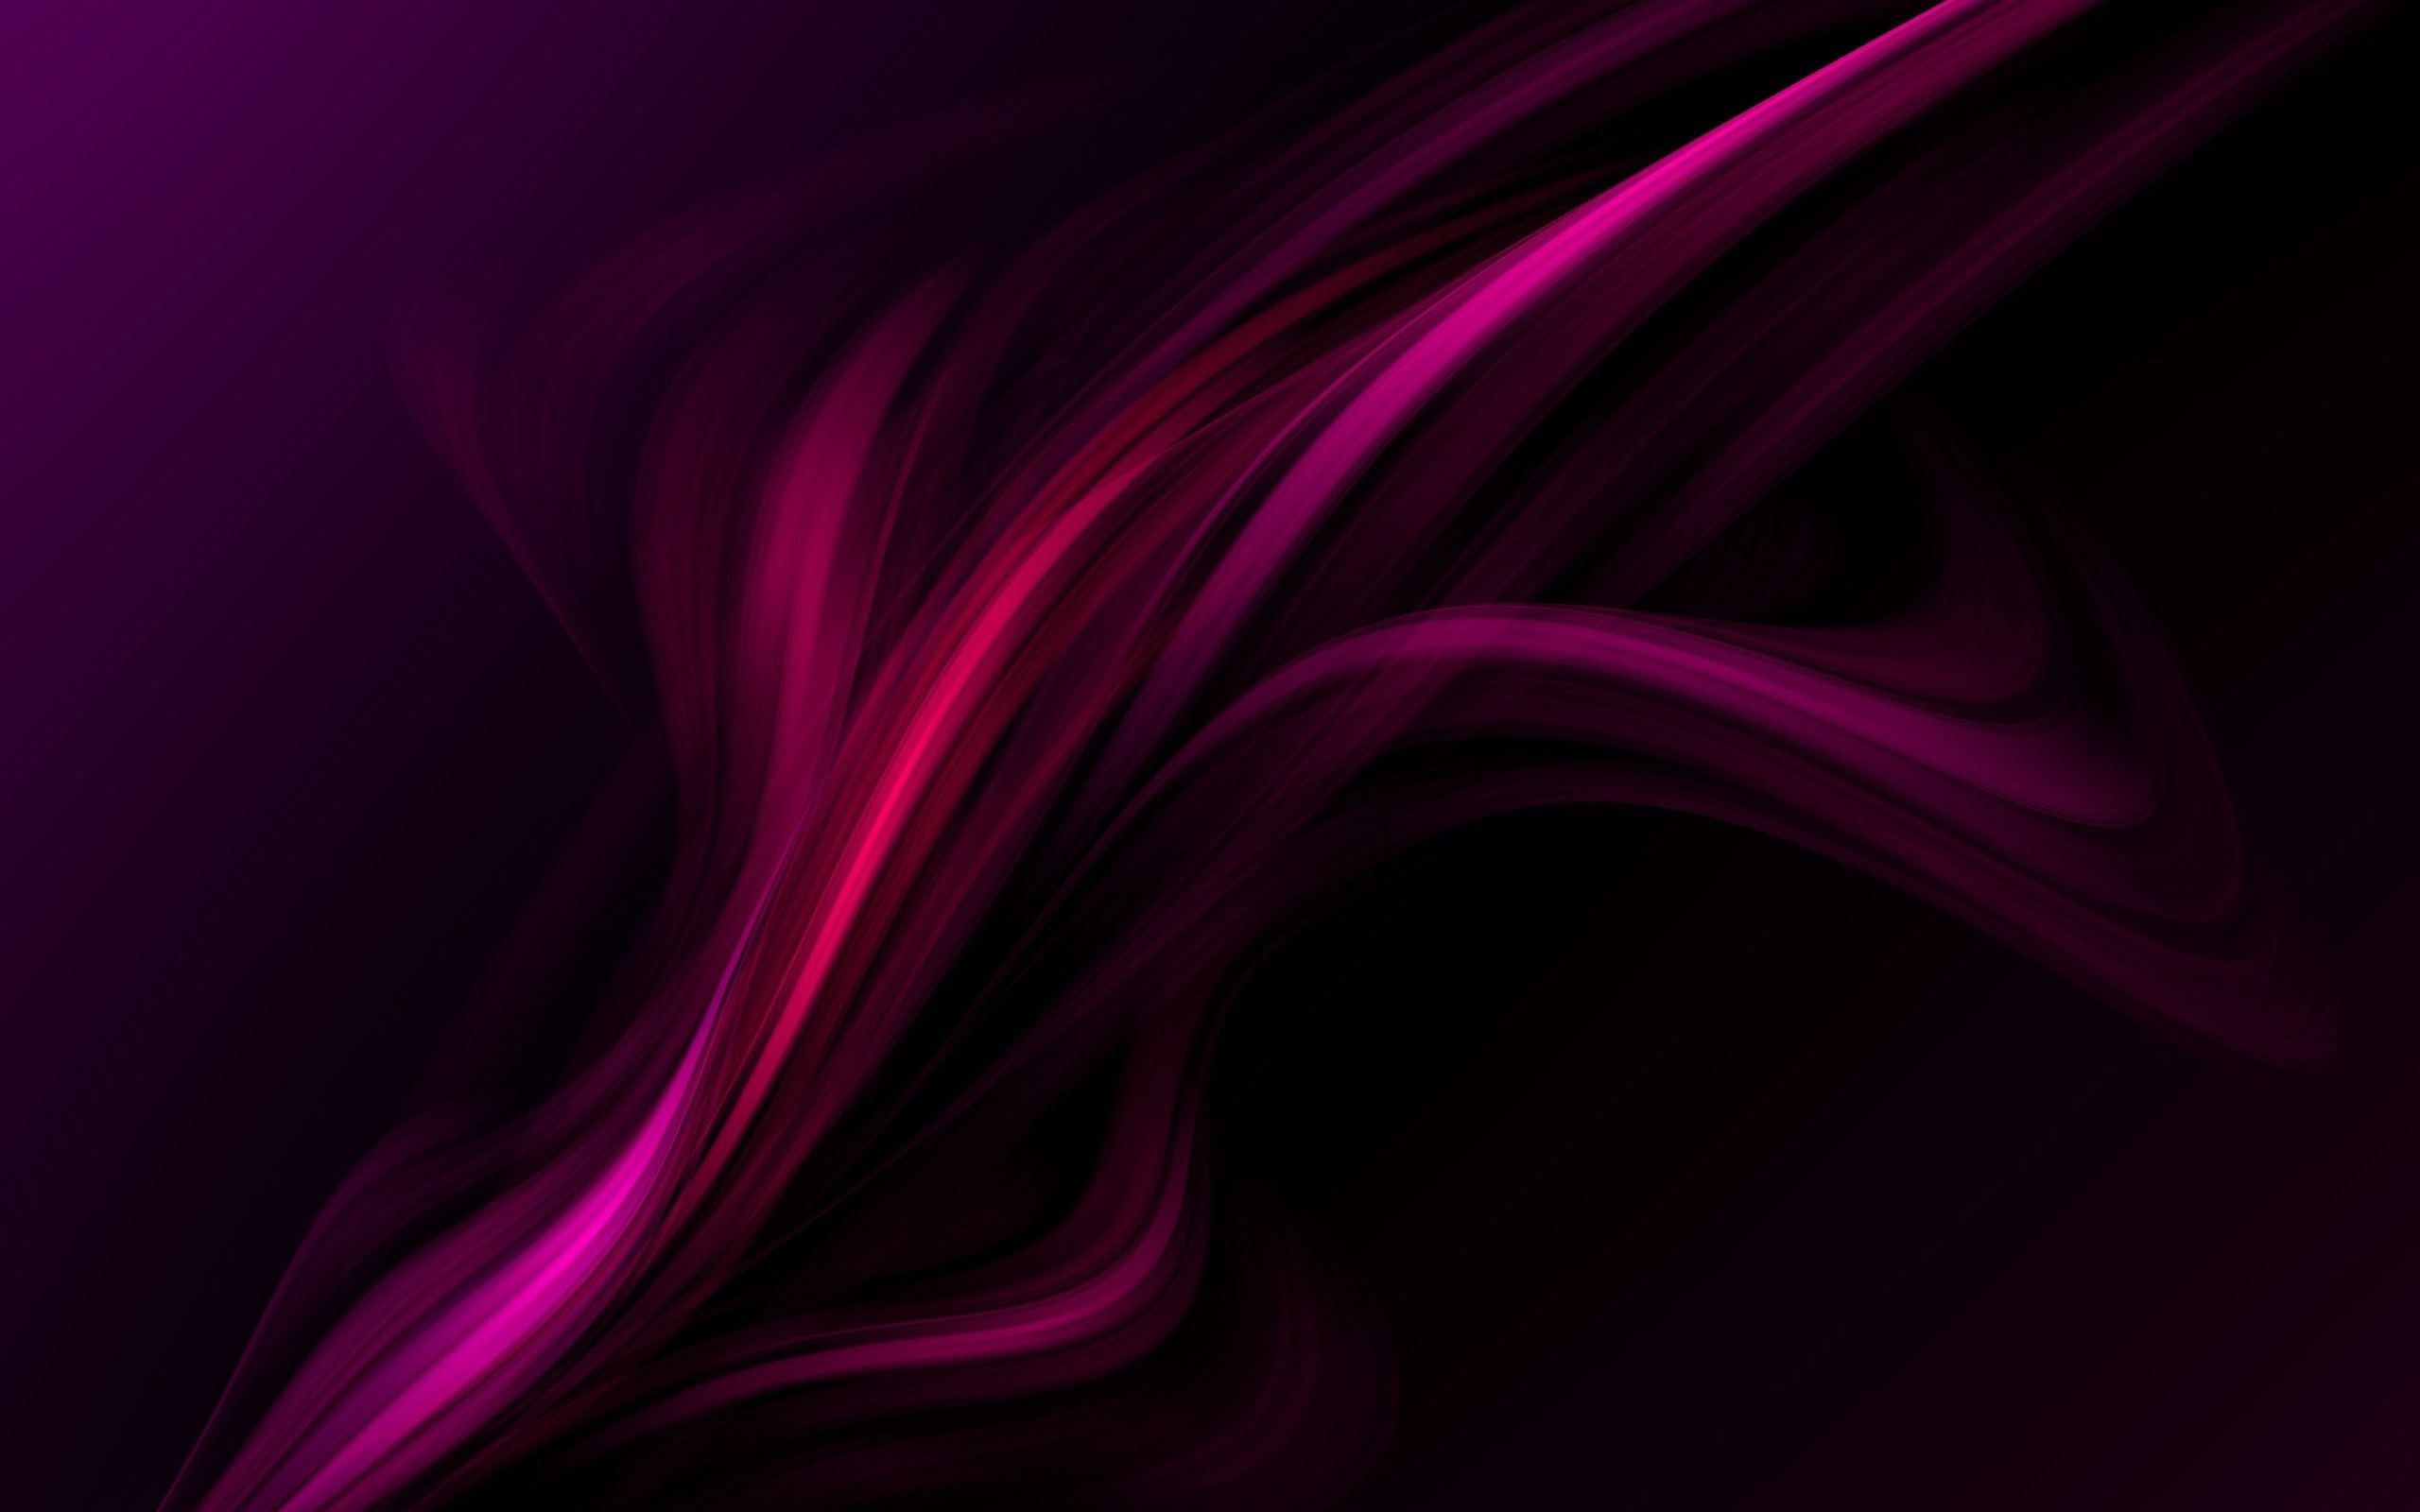 Wallpaper, black, abstract, red, purple, violet, pink, magenta, light, darkness, graphics, 2560x1600 px, computer wallpaper, fractal art, close up, macro photography 2560x1600